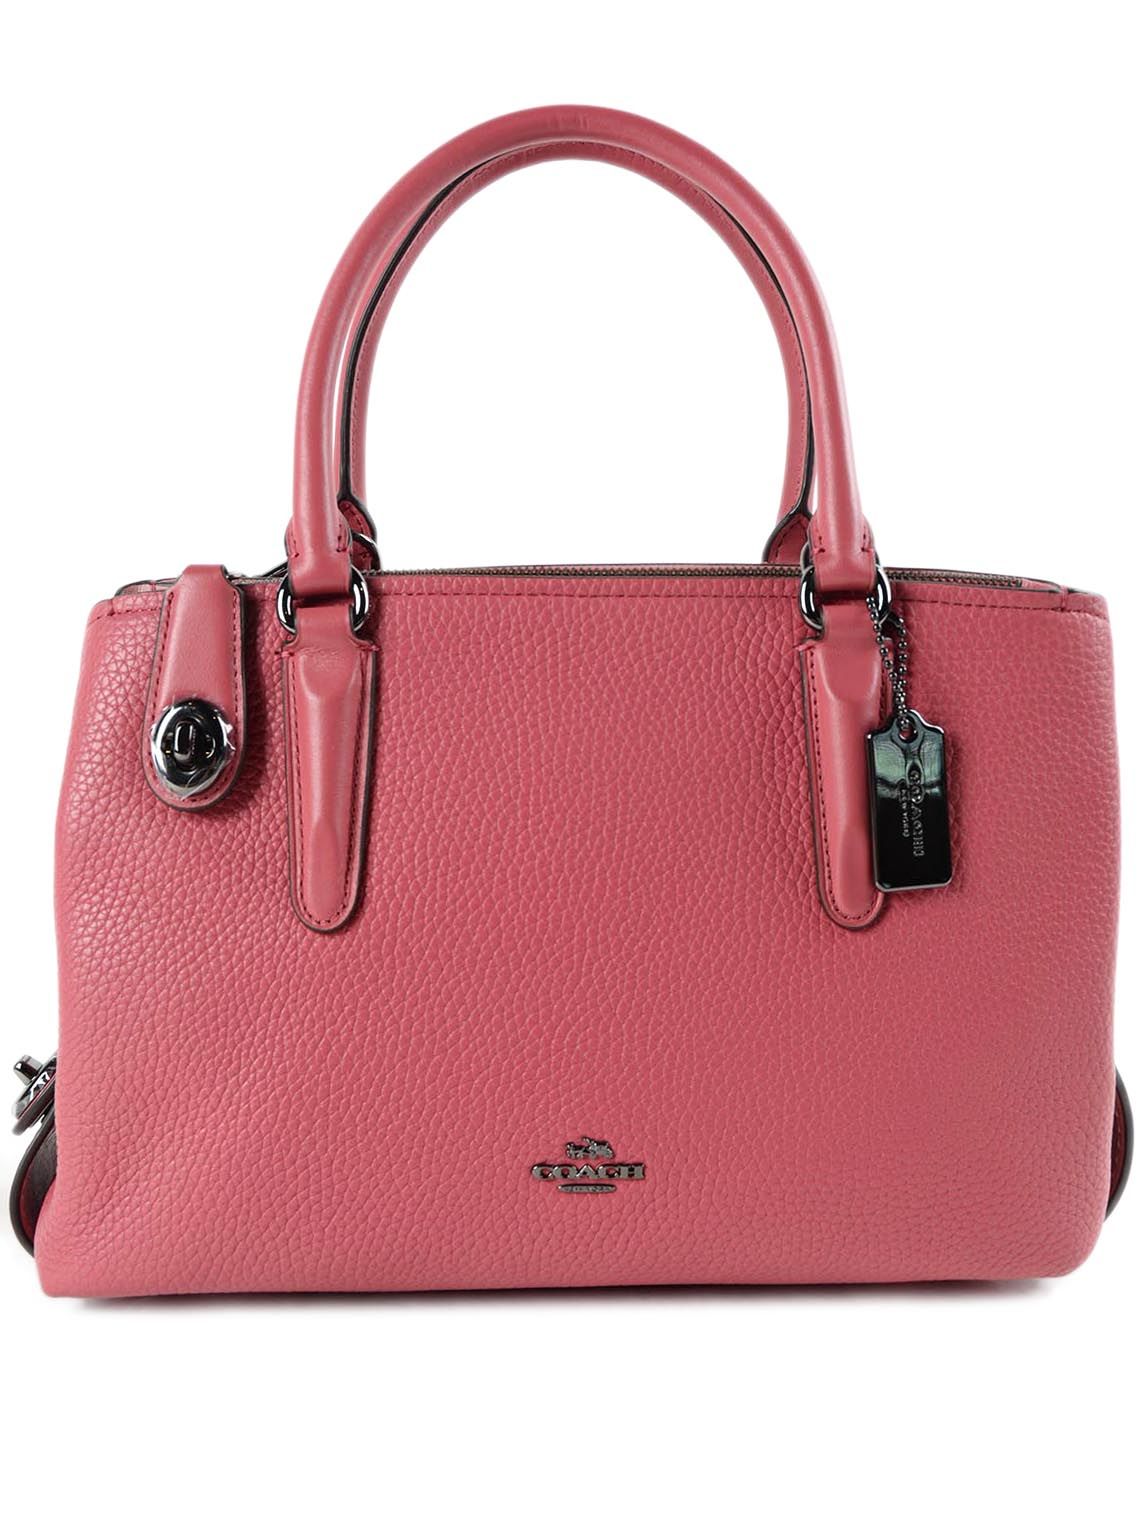 Coach - Coach Brooklyn 28 Carryall Tote - Pink & Purple, Women's Totes